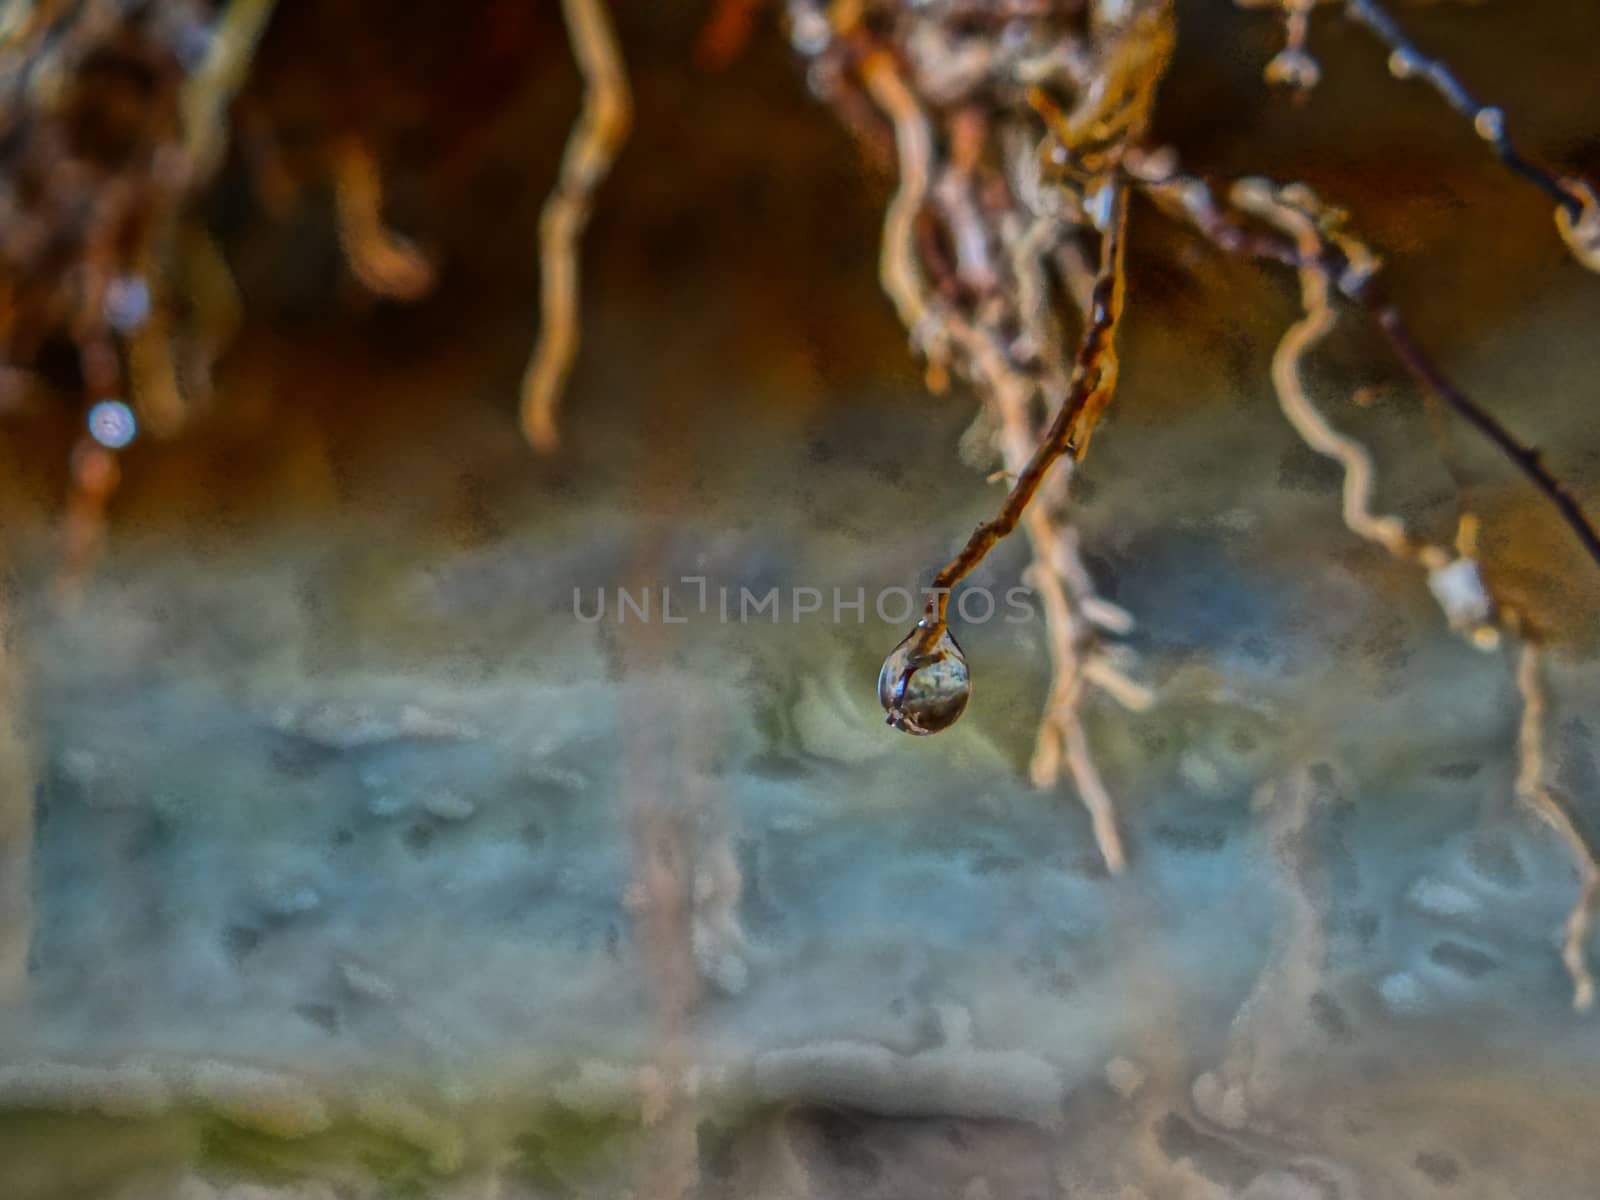 A water drop falling down on a single root in front of a blurry background. by justbrotography